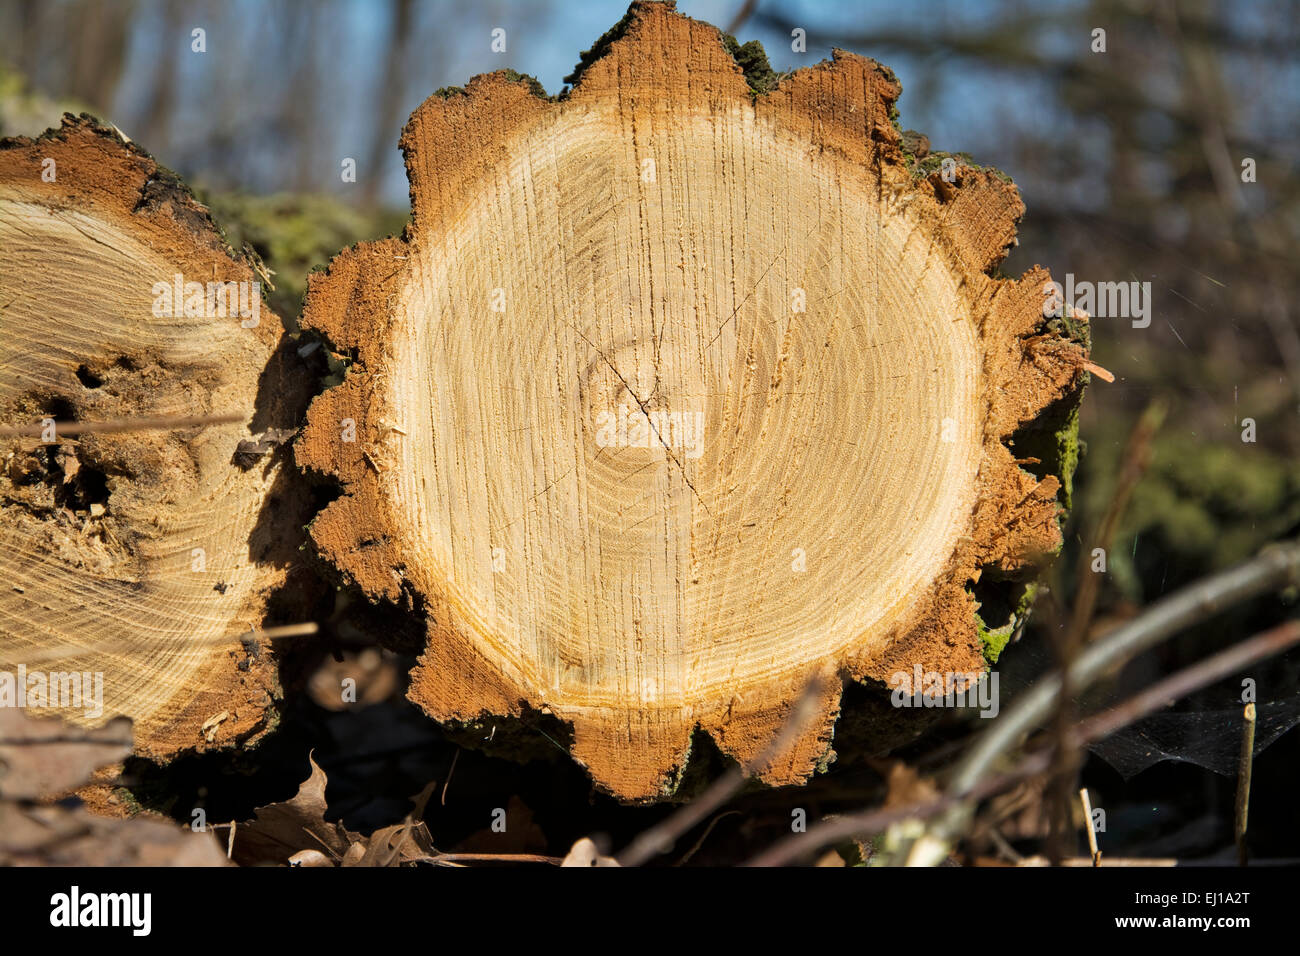 Cutting pine log with a symmetrical cross-section Stock Photo